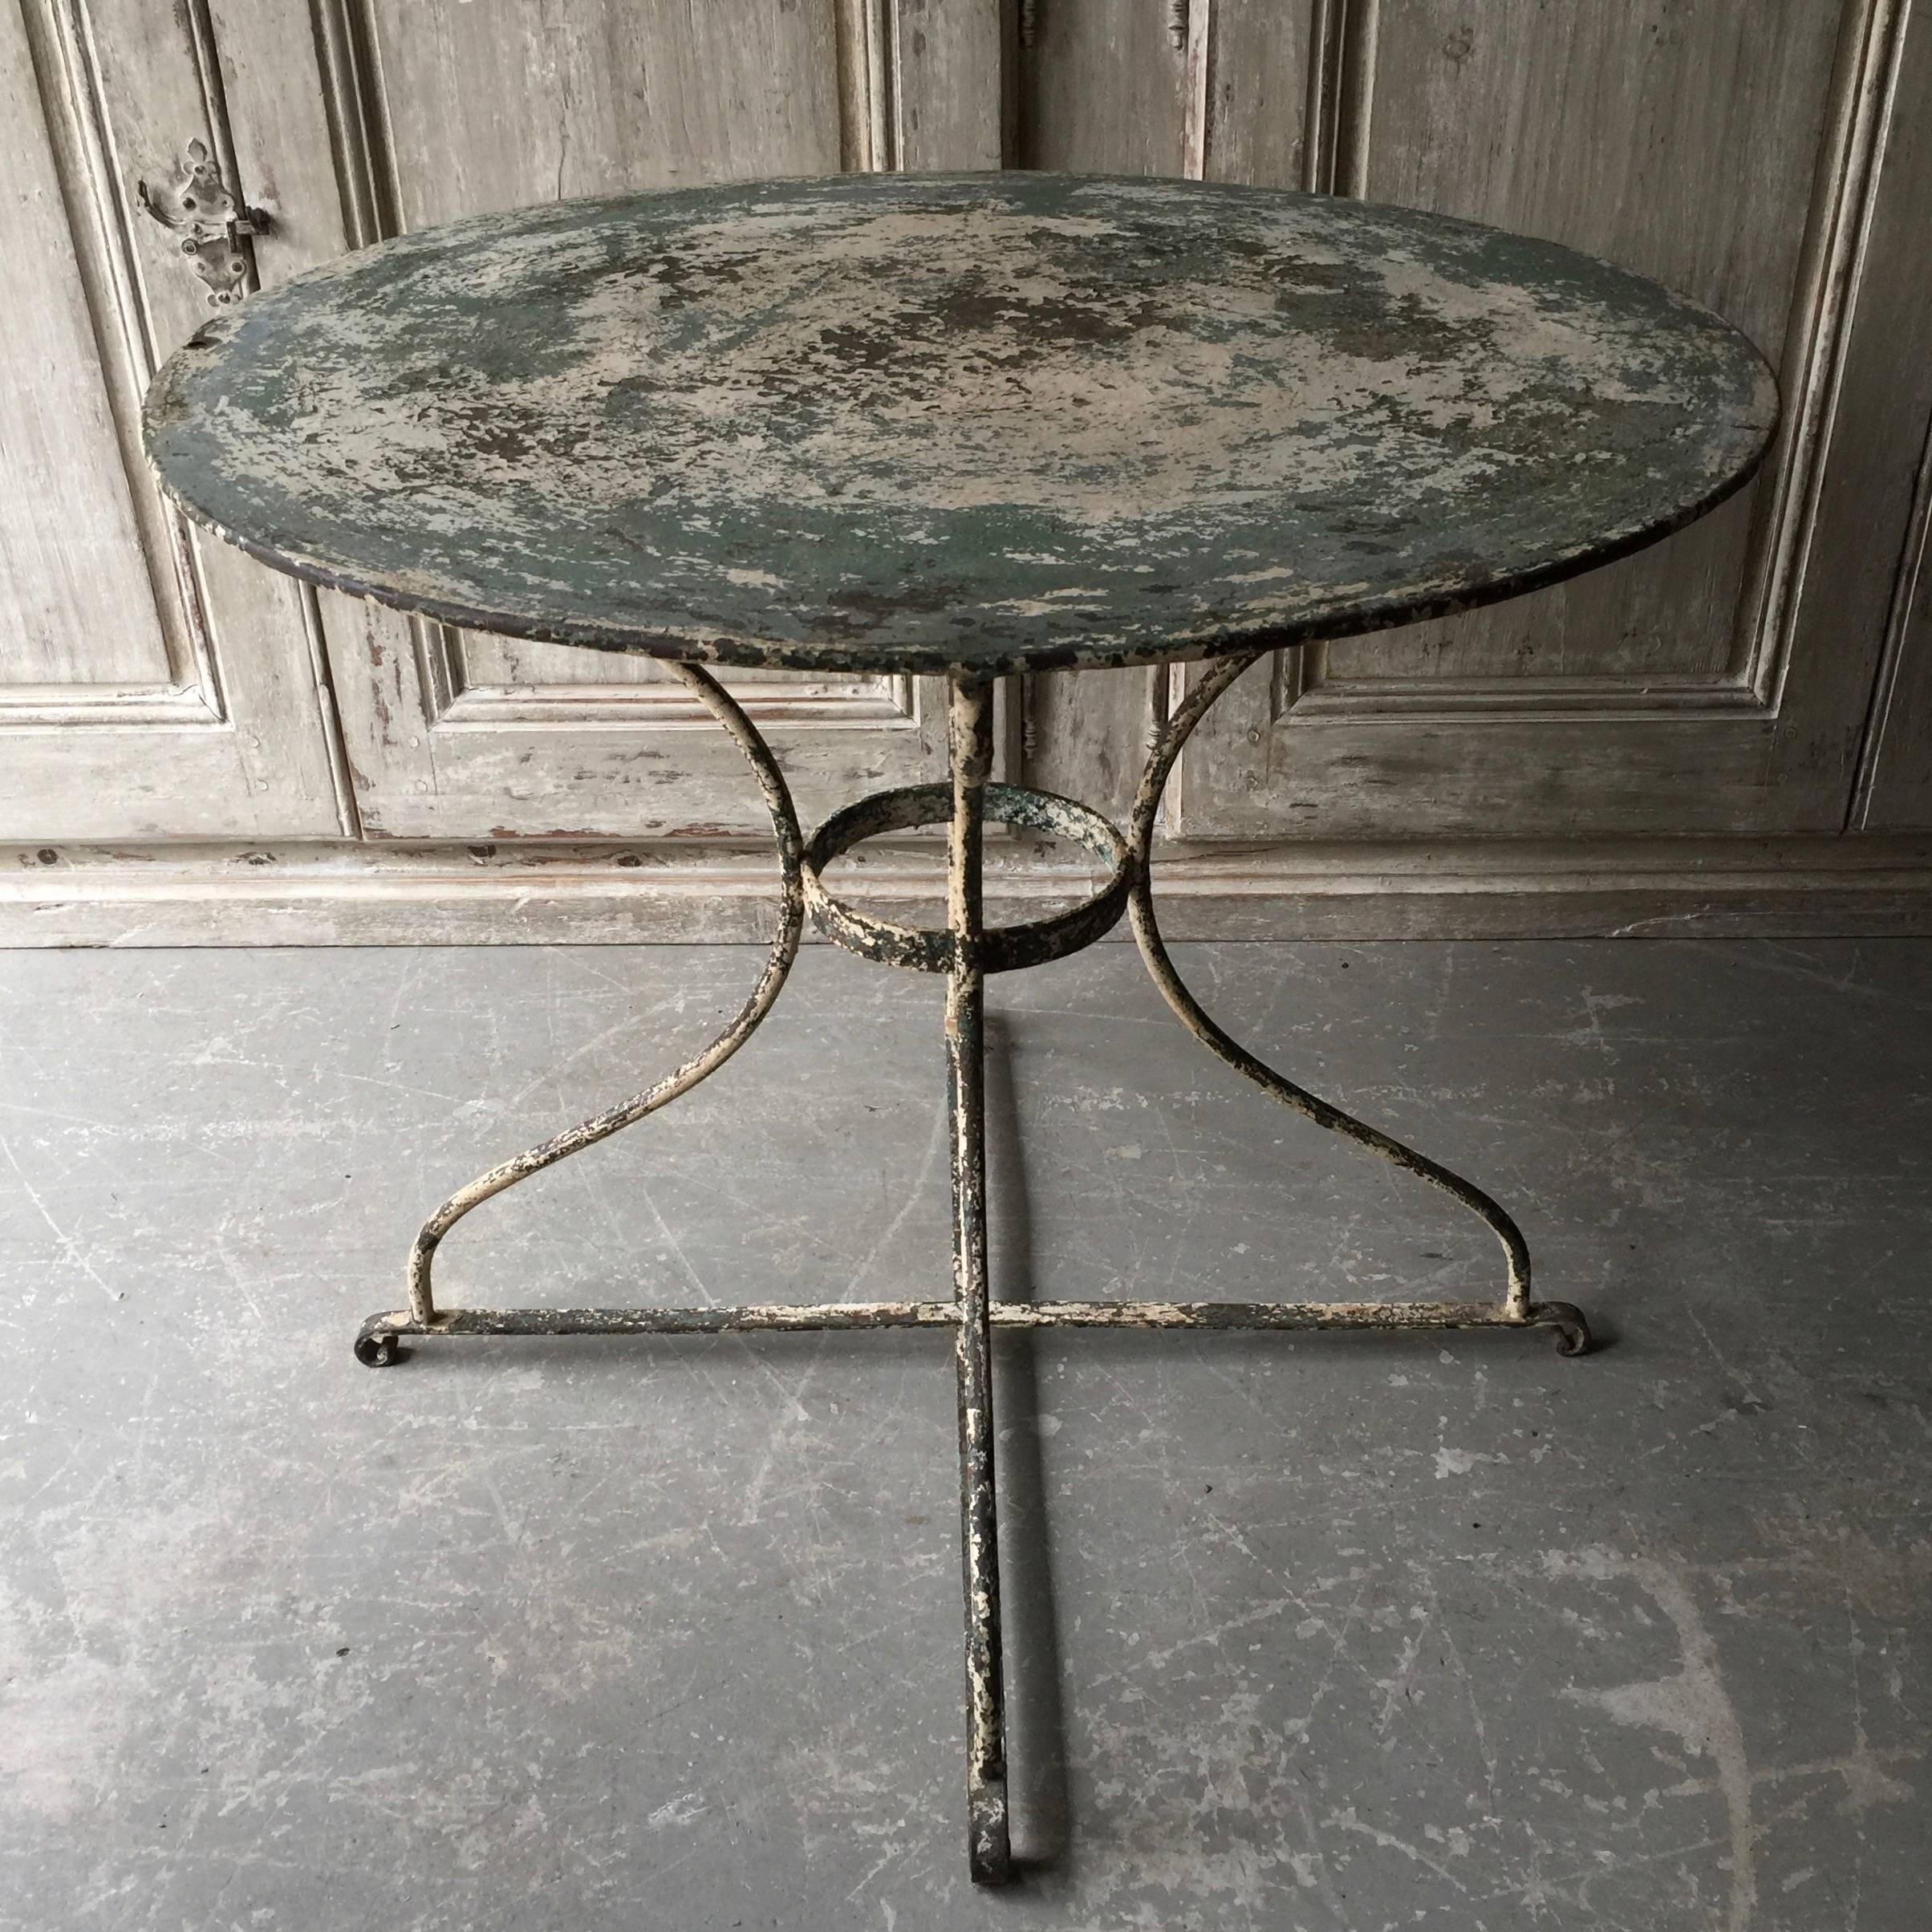 A large 19th century French iron bistro table in worn greenish/white patina.